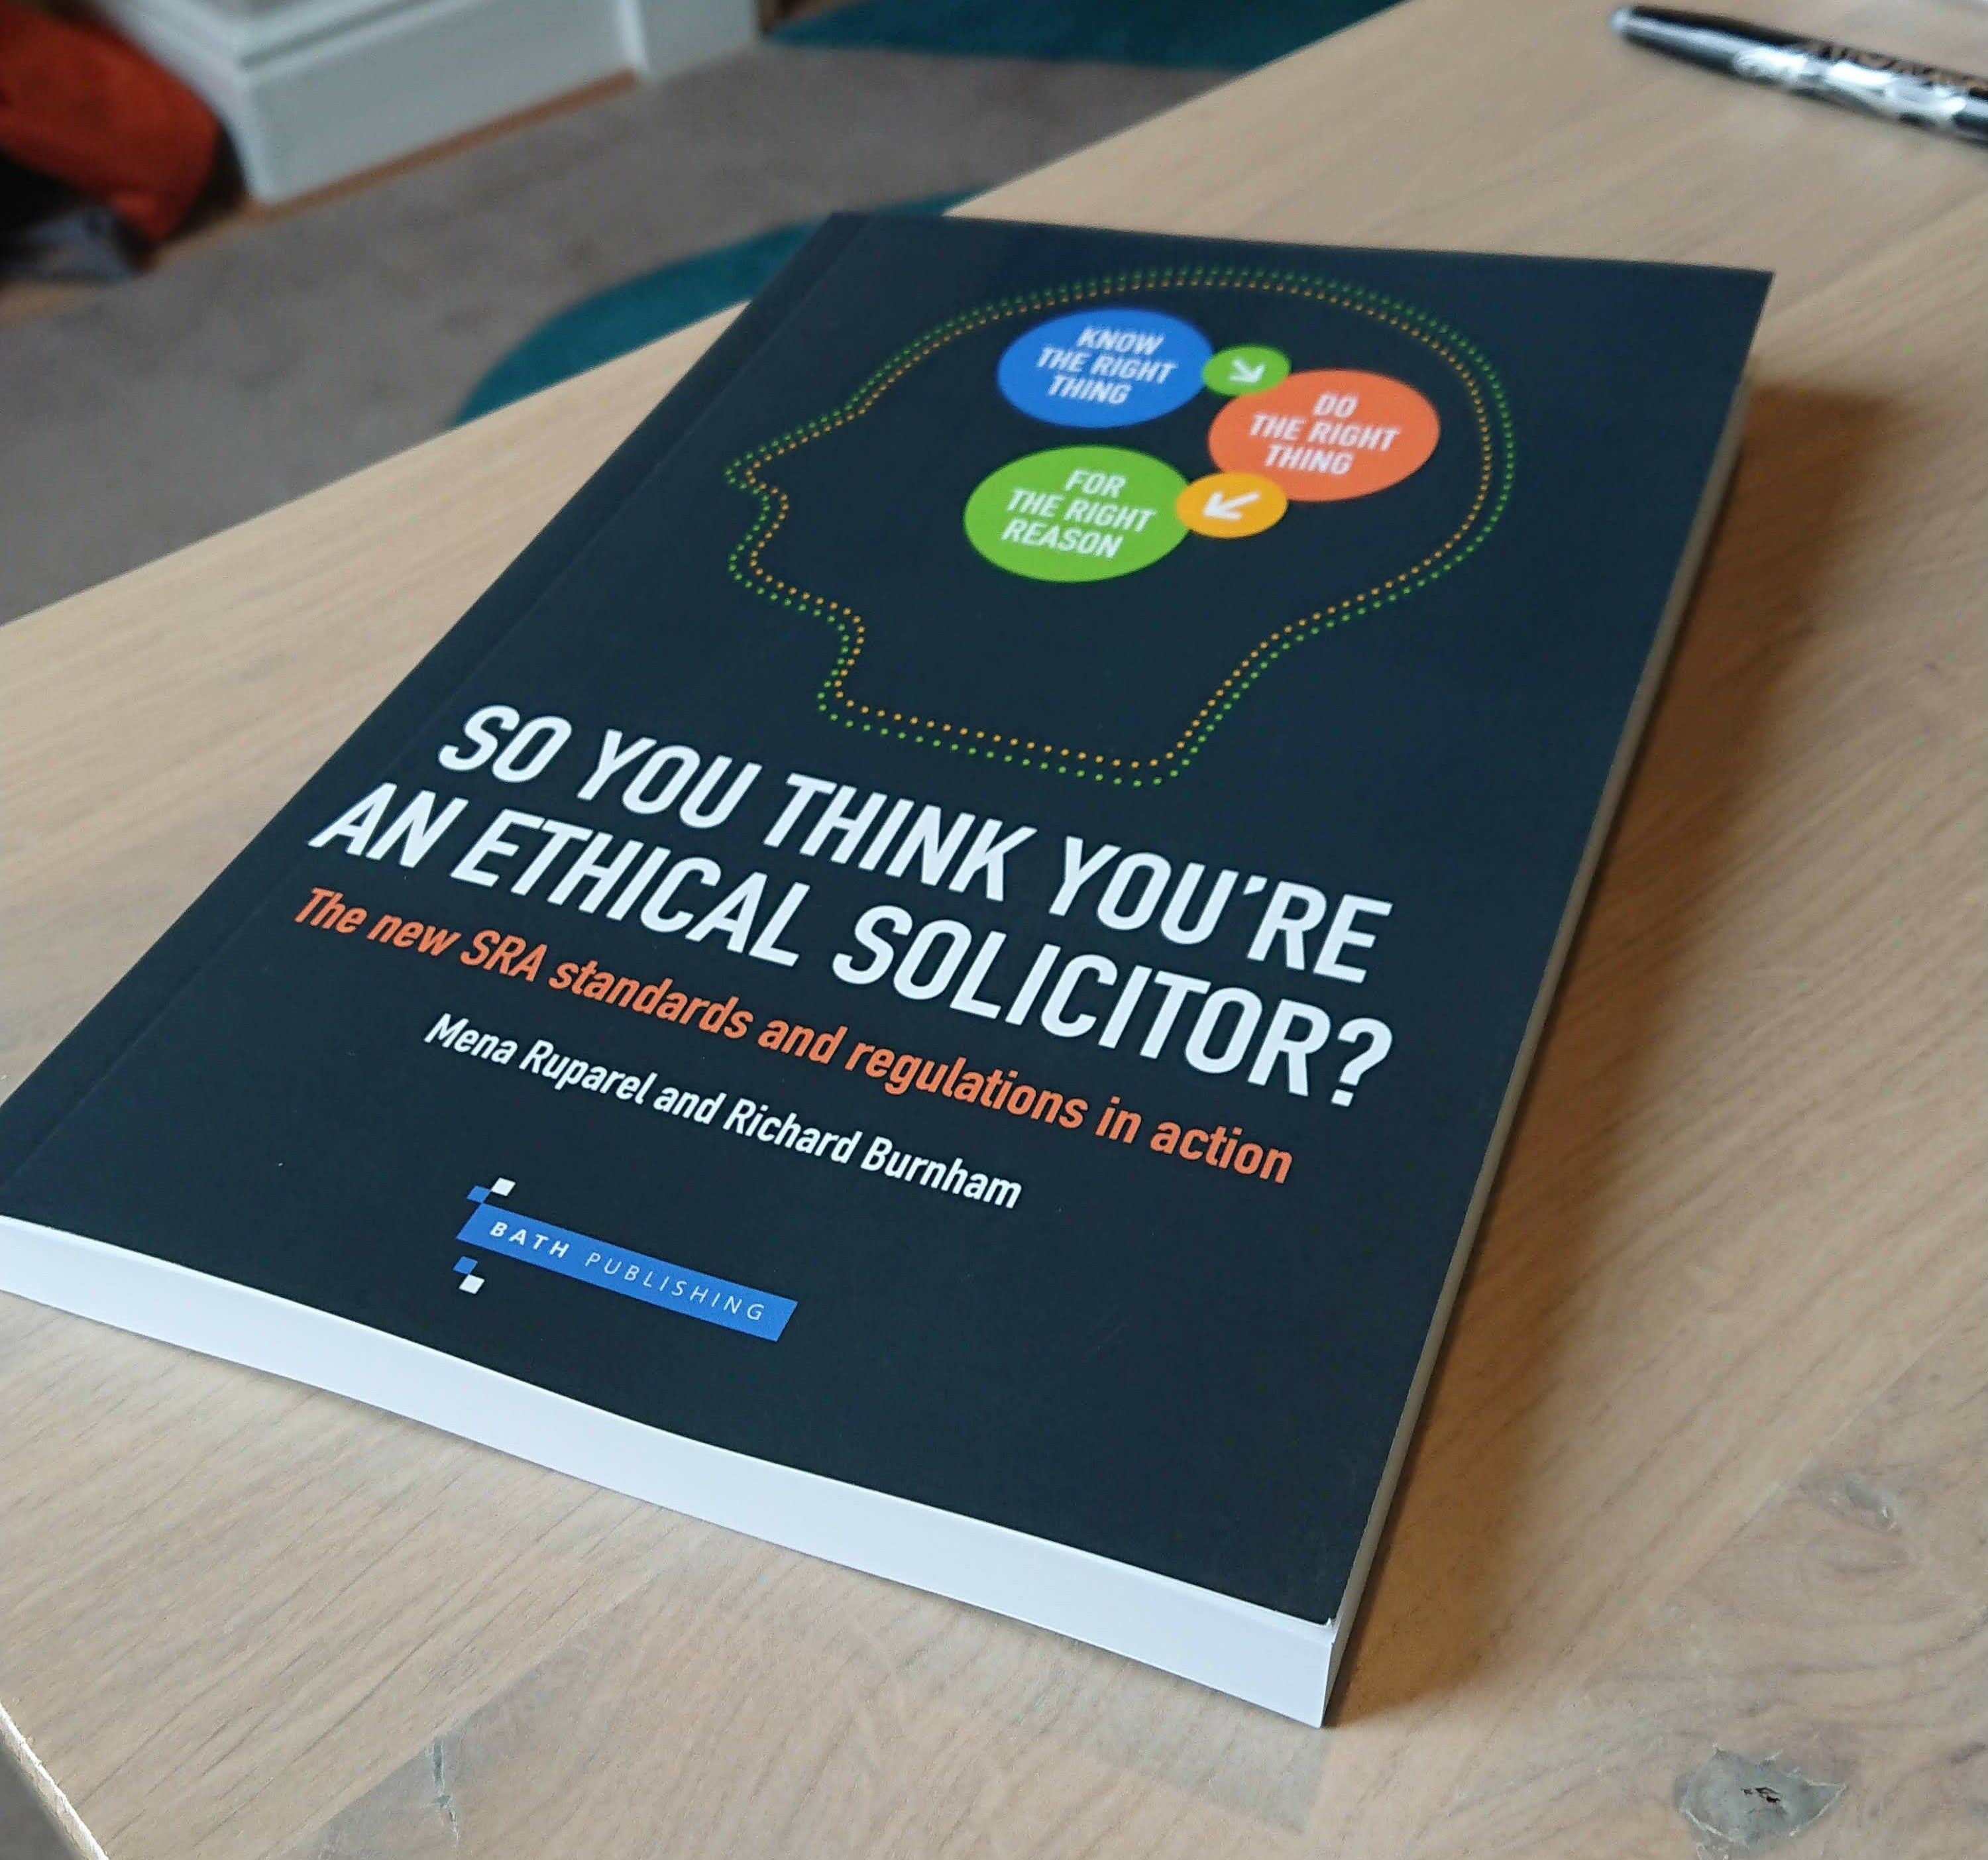 So You Think You're an Ethical Solicitor? In print now